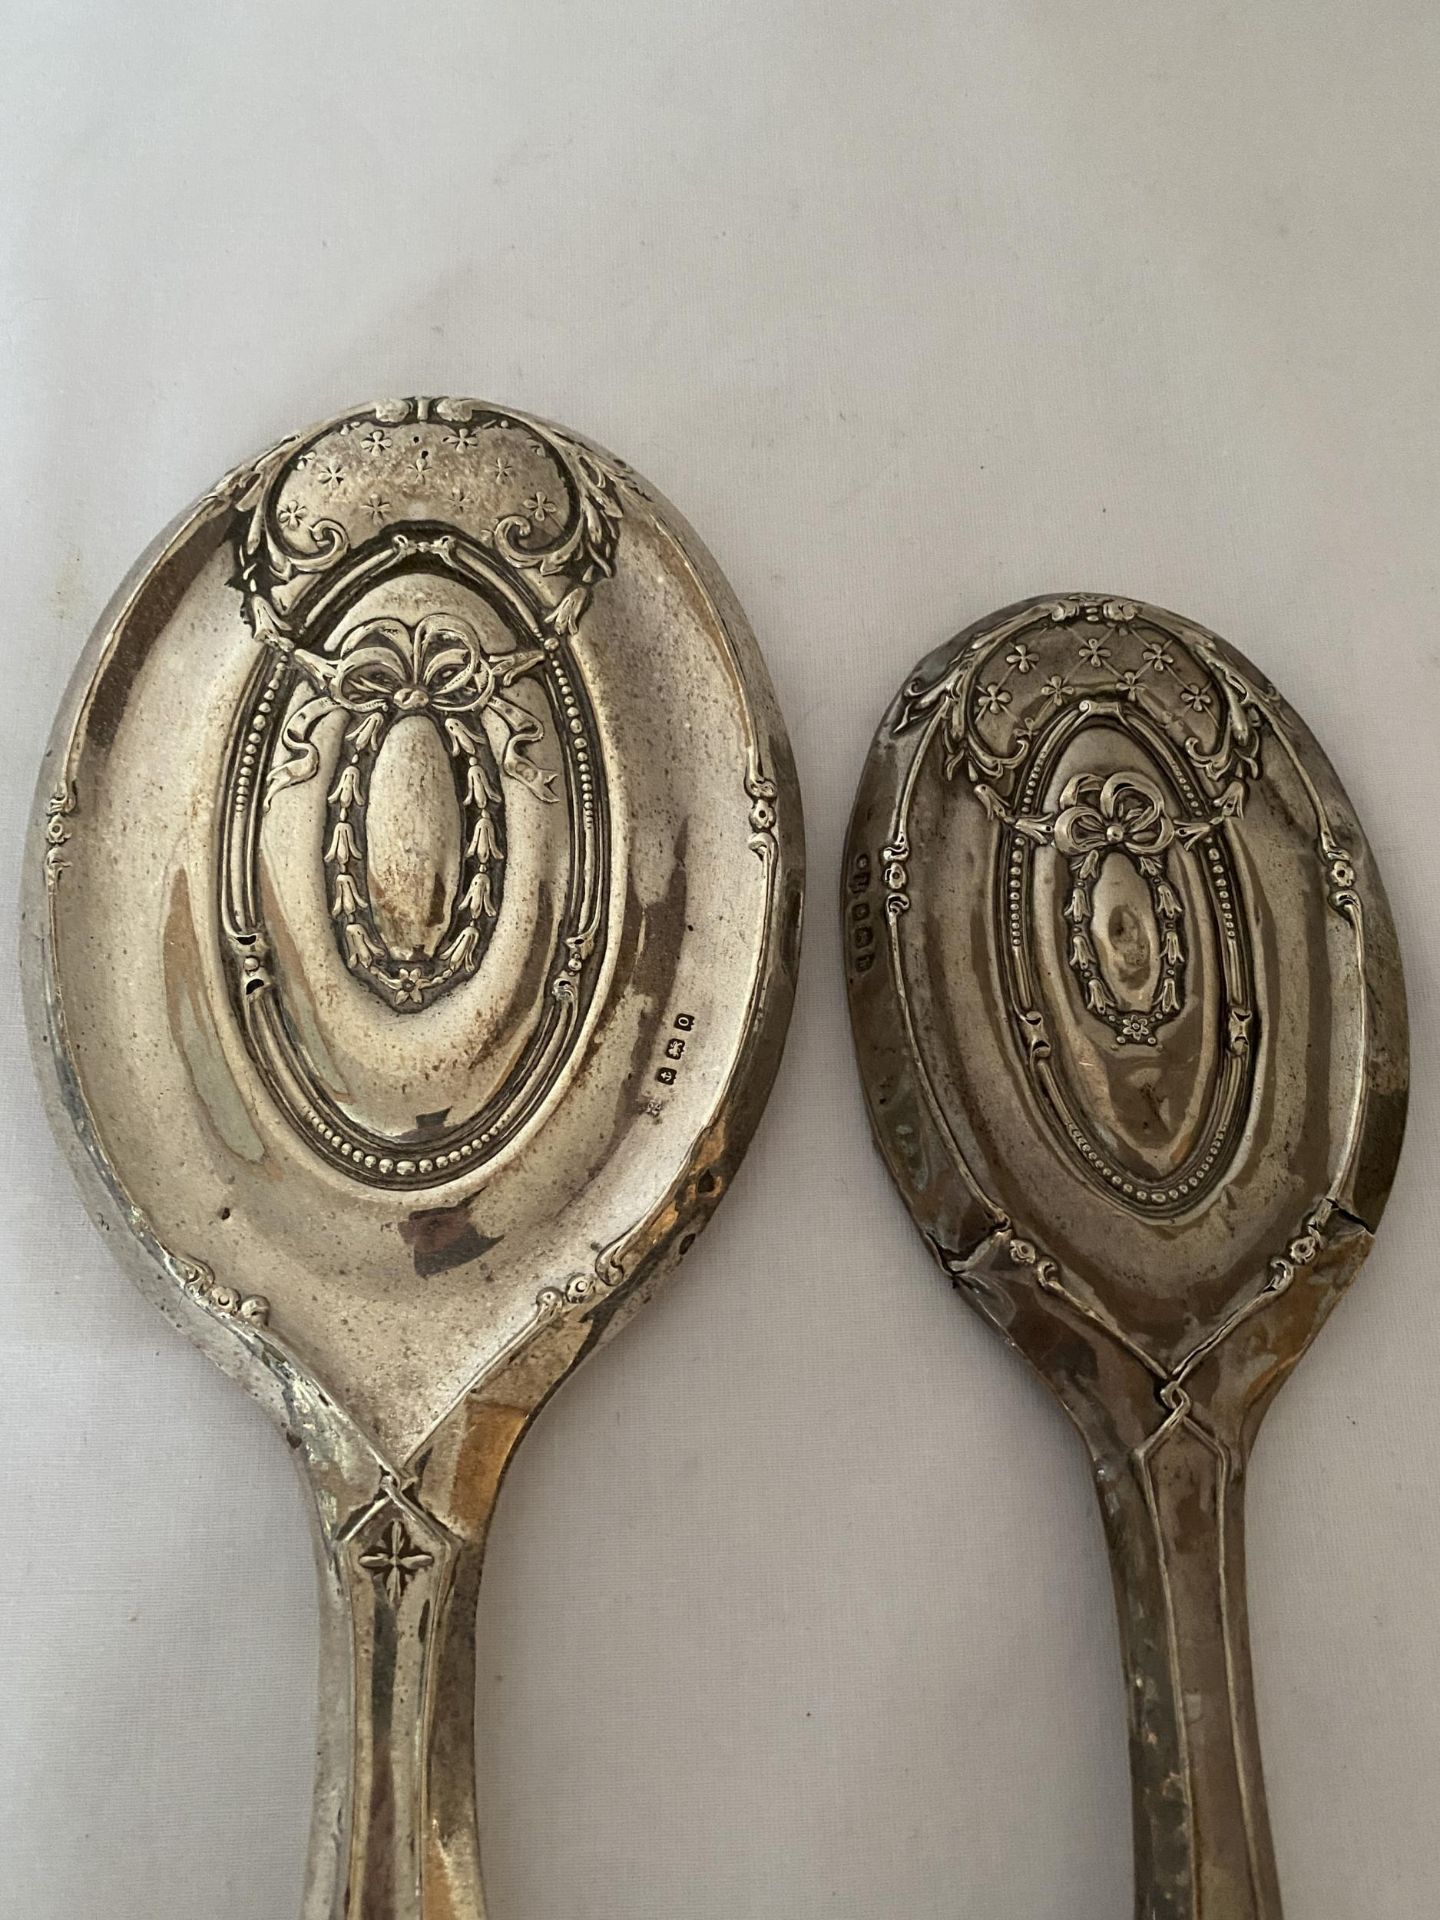 TWO HALLMARKED BIRMINGHAM SILVER BACKED HAND MIRRORS, EARLIEST DATING TO 1913 - Image 6 of 18